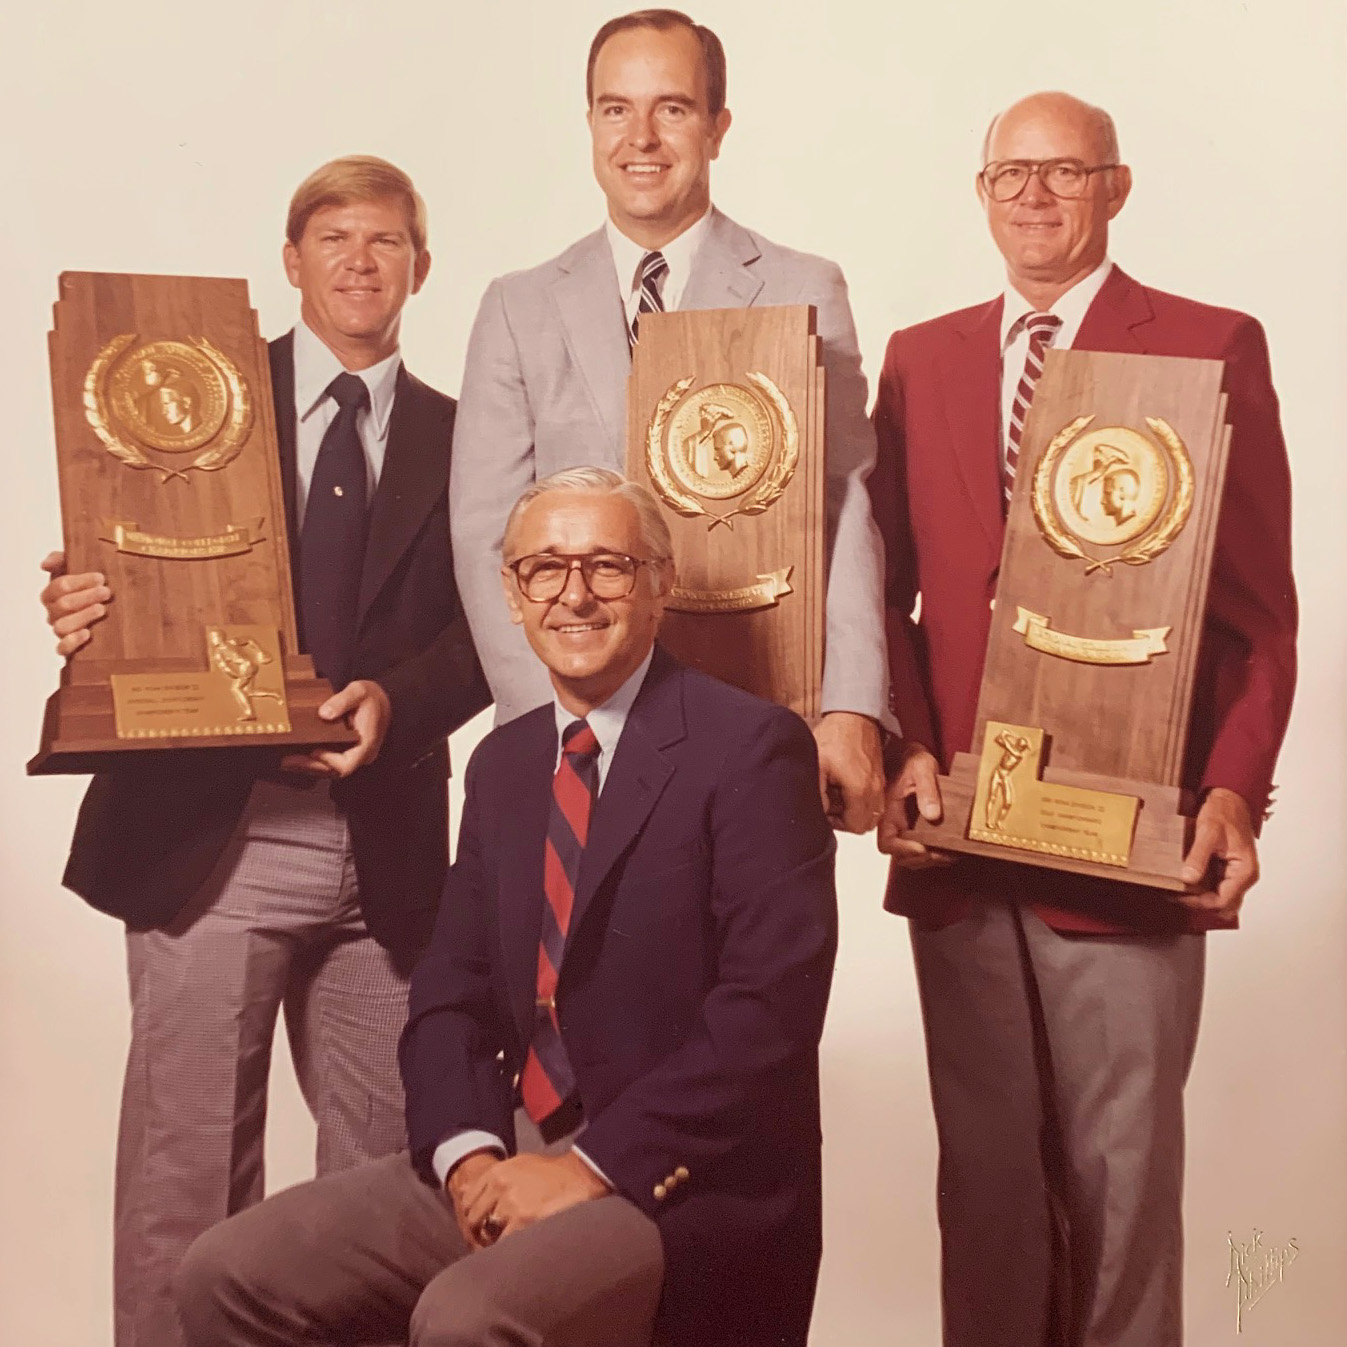 Hal Wissel, Charley Matlock, Joe Arnold, and Hal Smeltzly holding awards